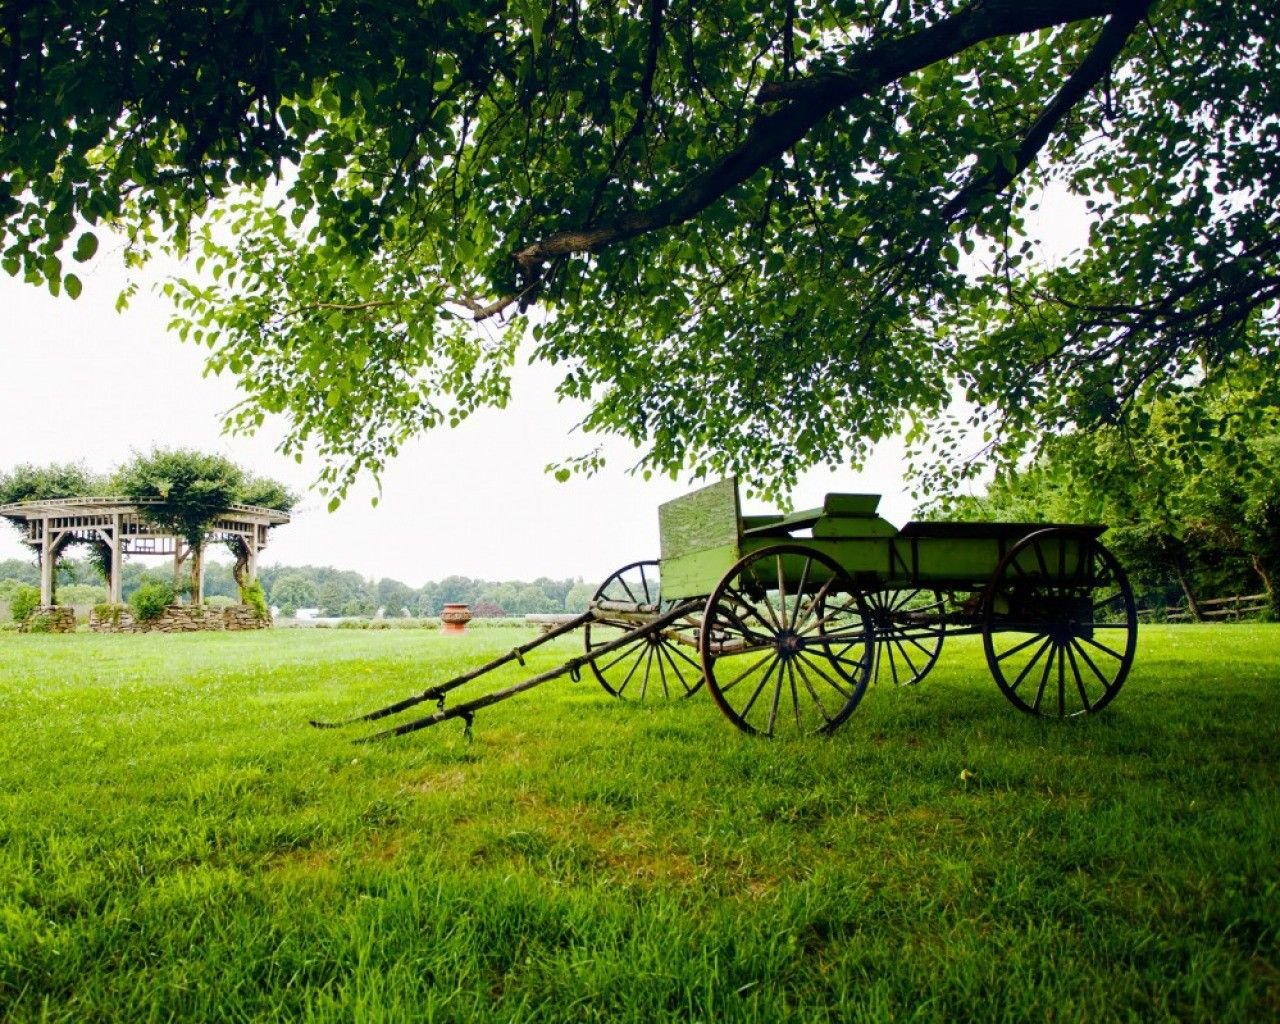 Landscape with a cart wallpaper and image, picture